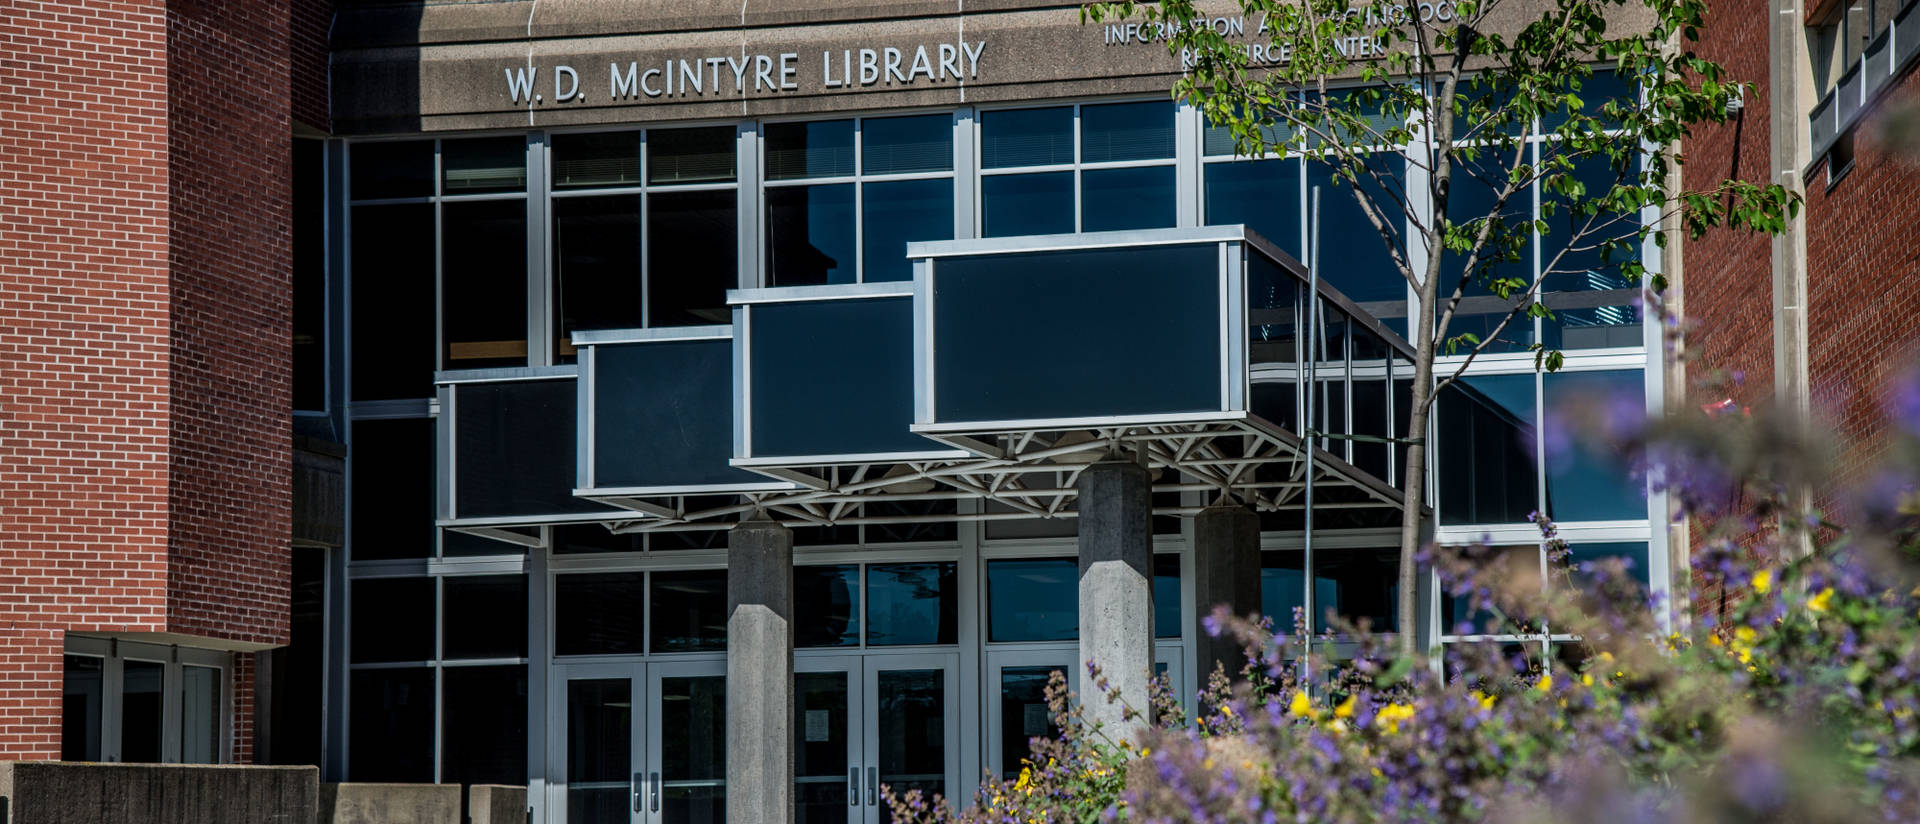 Main entrance to McIntyre Library on the UW-Eau Claire campus.